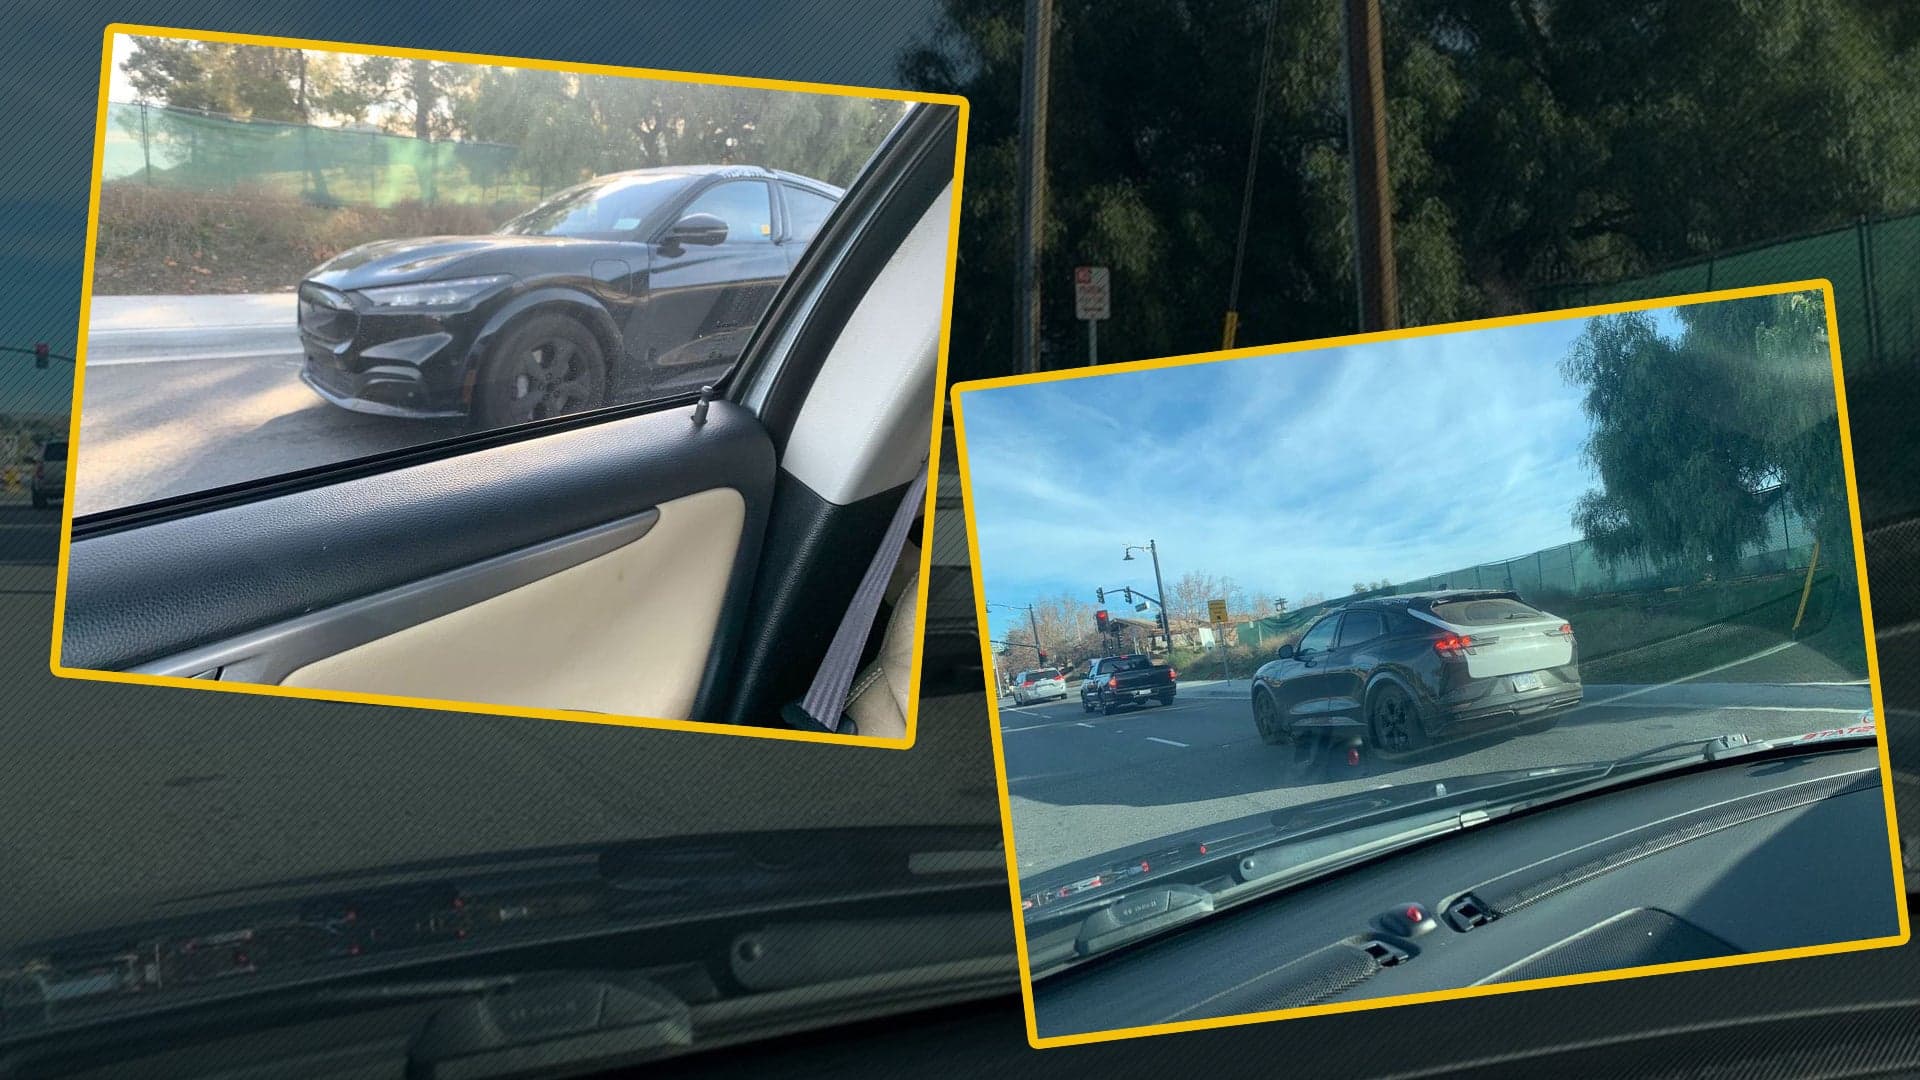 Watch: Pre-Production 2021 Ford Mustang Mach-E Spied Testing on Mulholland Drive